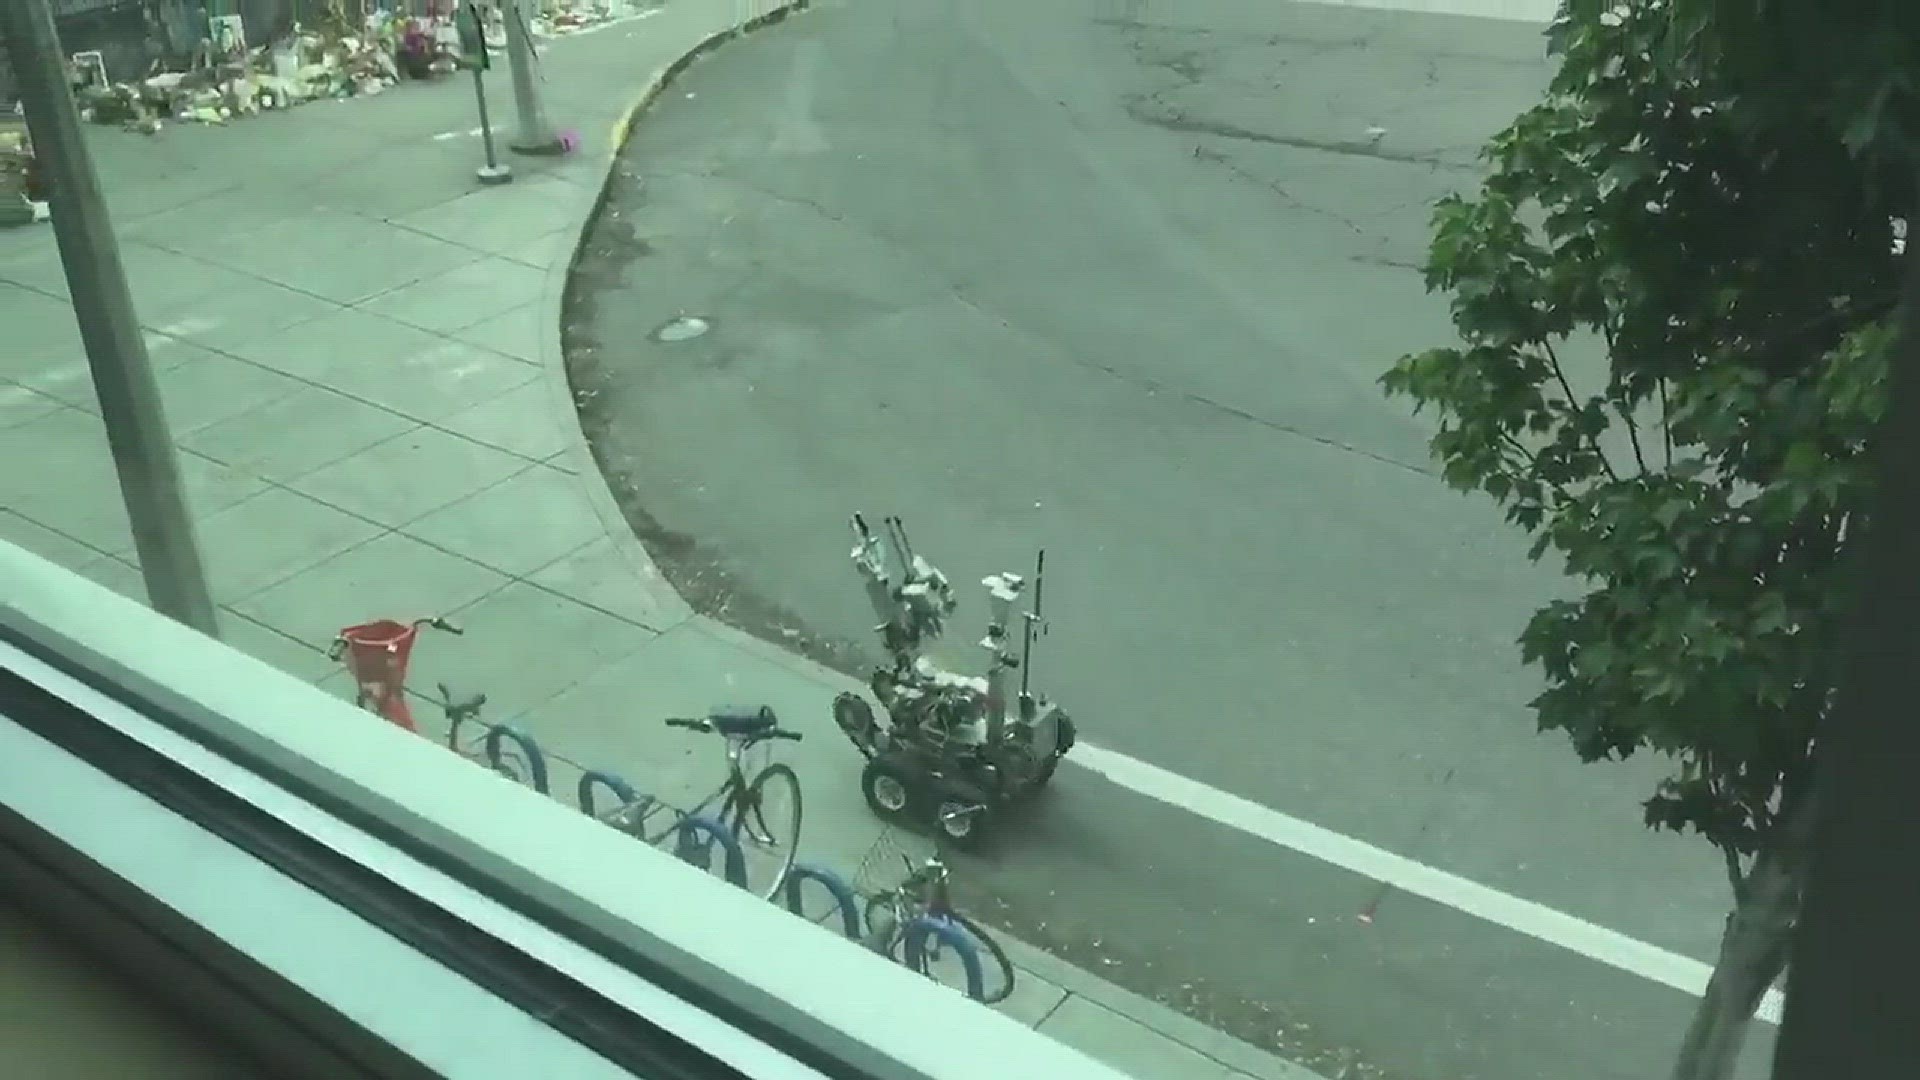 Video of a bomb detection robot at the Hollywood Transit Center memorial, June 9, 2017, Credit: Andy Ngo